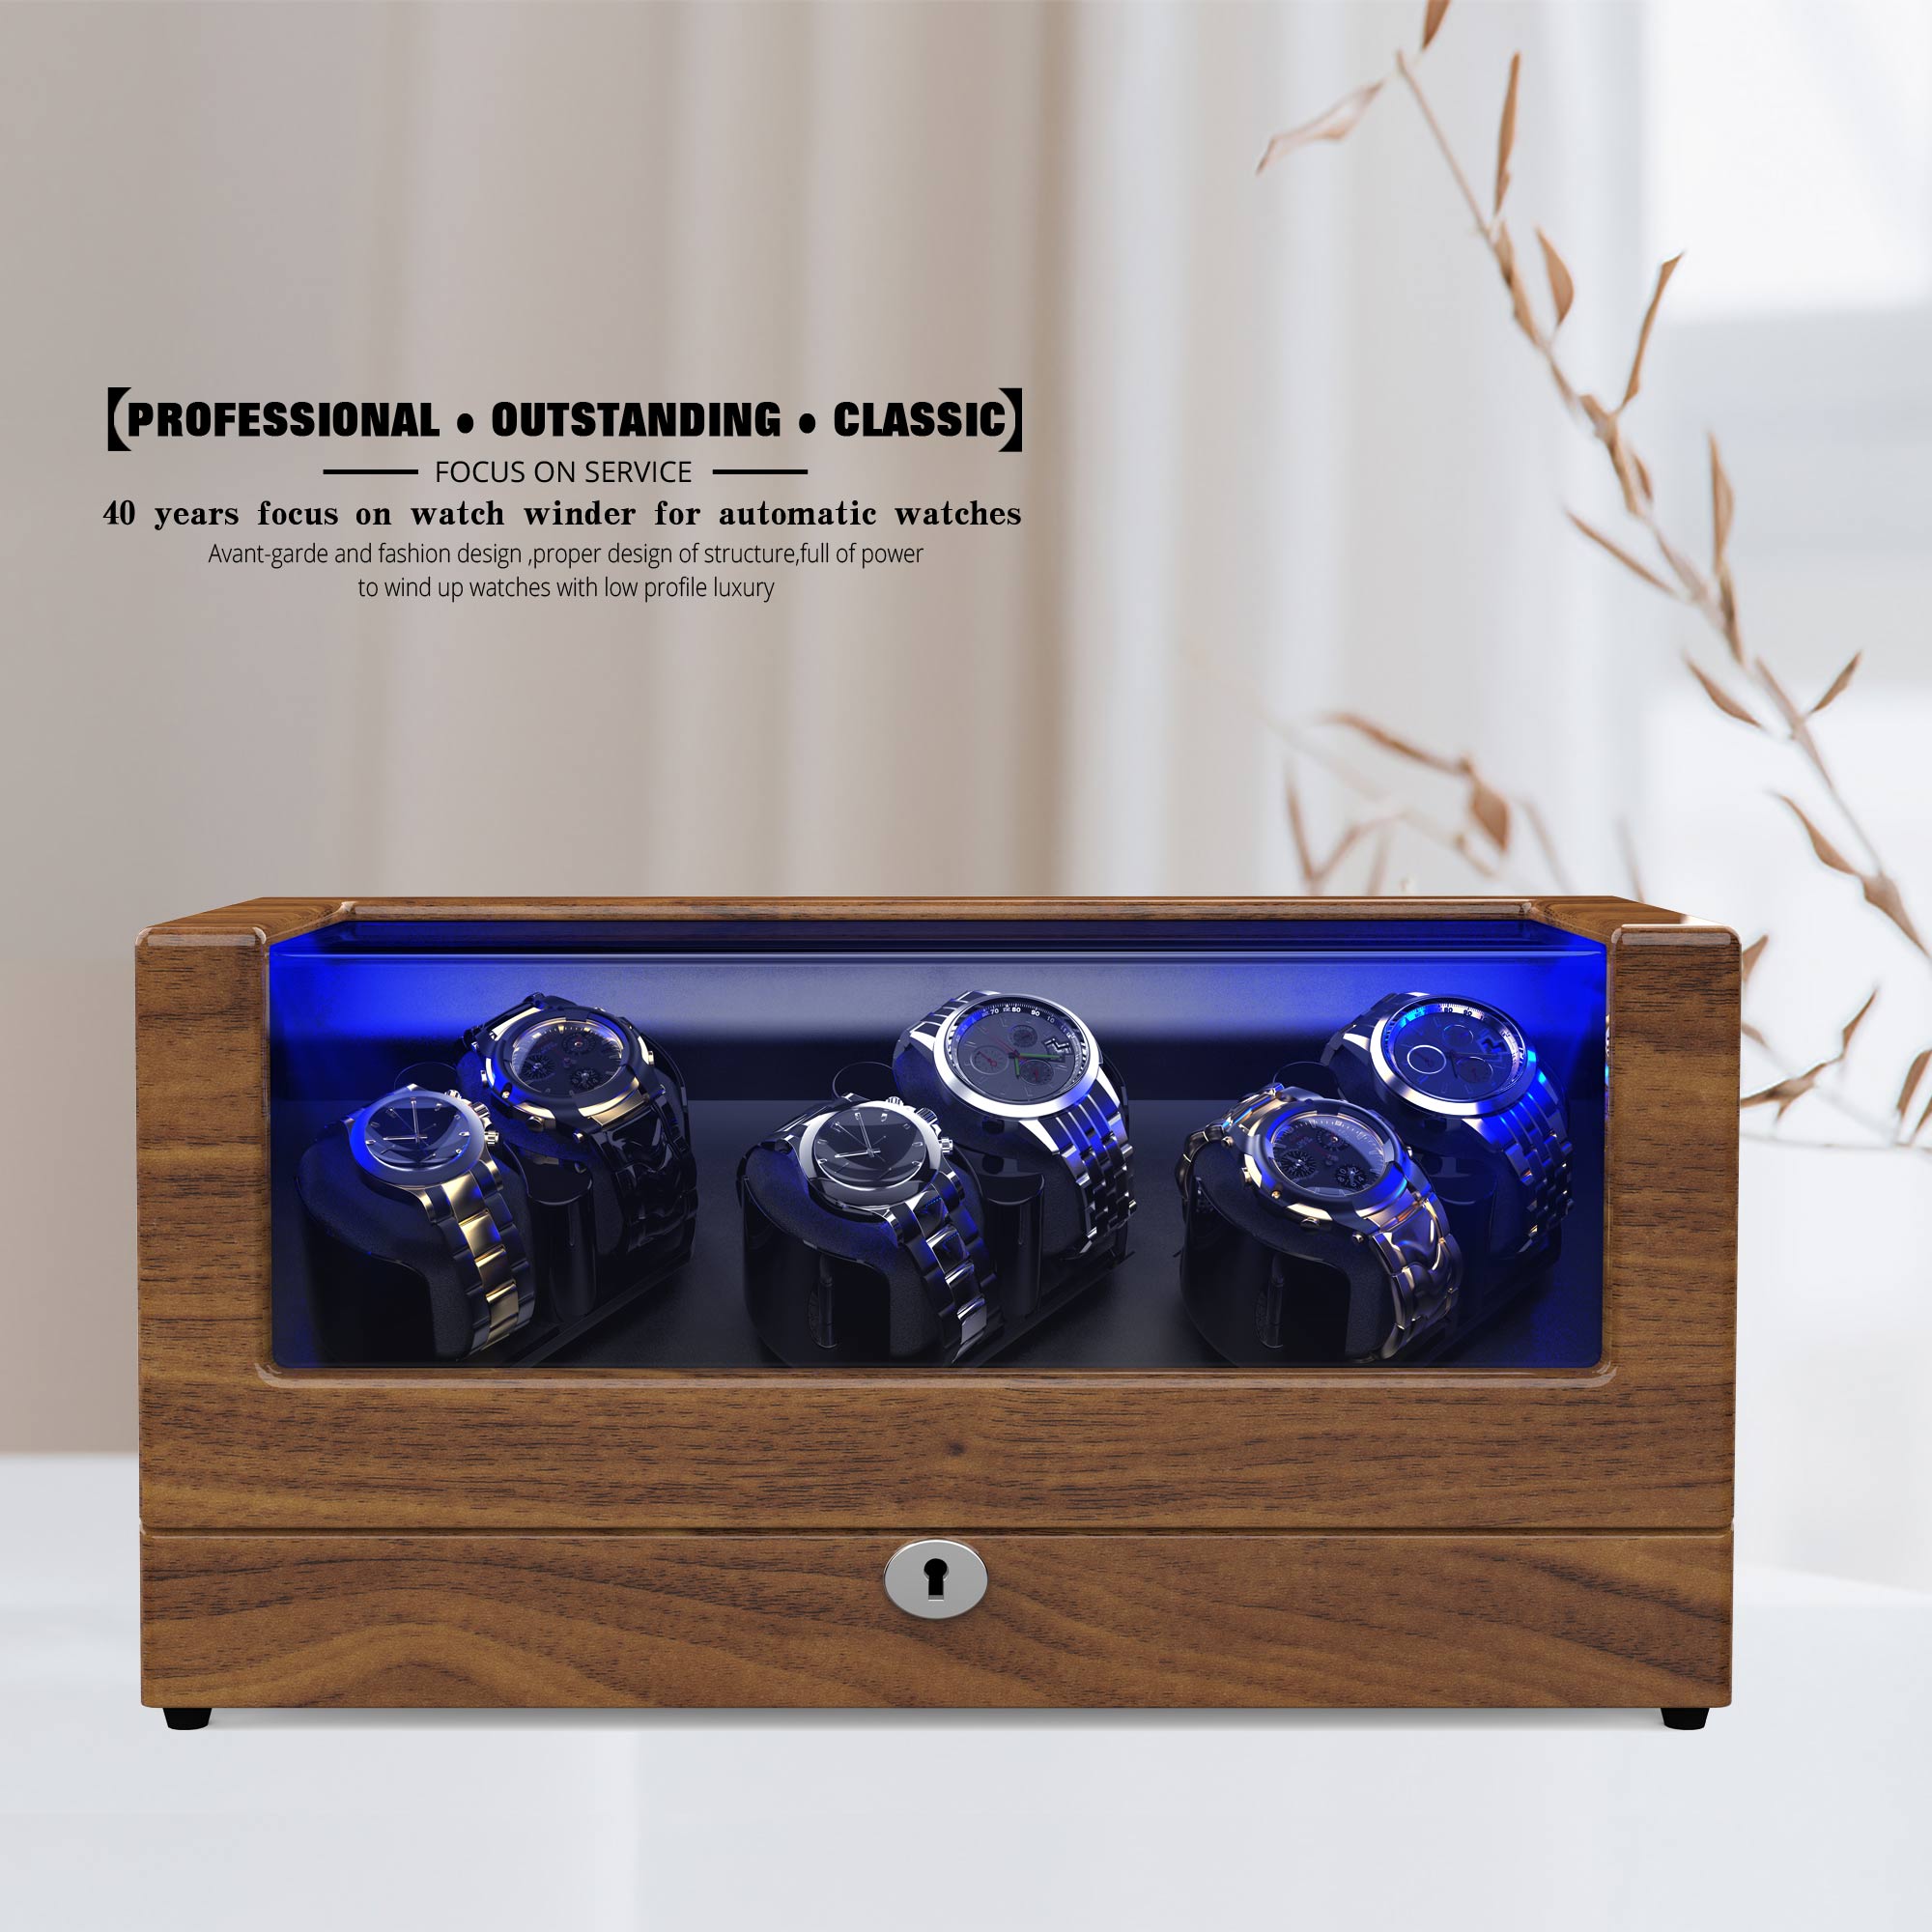 ALPHAWIN Watch Winder for Automatic Watches, Automatic Watch Winders with Quiet Motors, Anti-Magnetic Watch Winder Box for Men Women's Mechanical